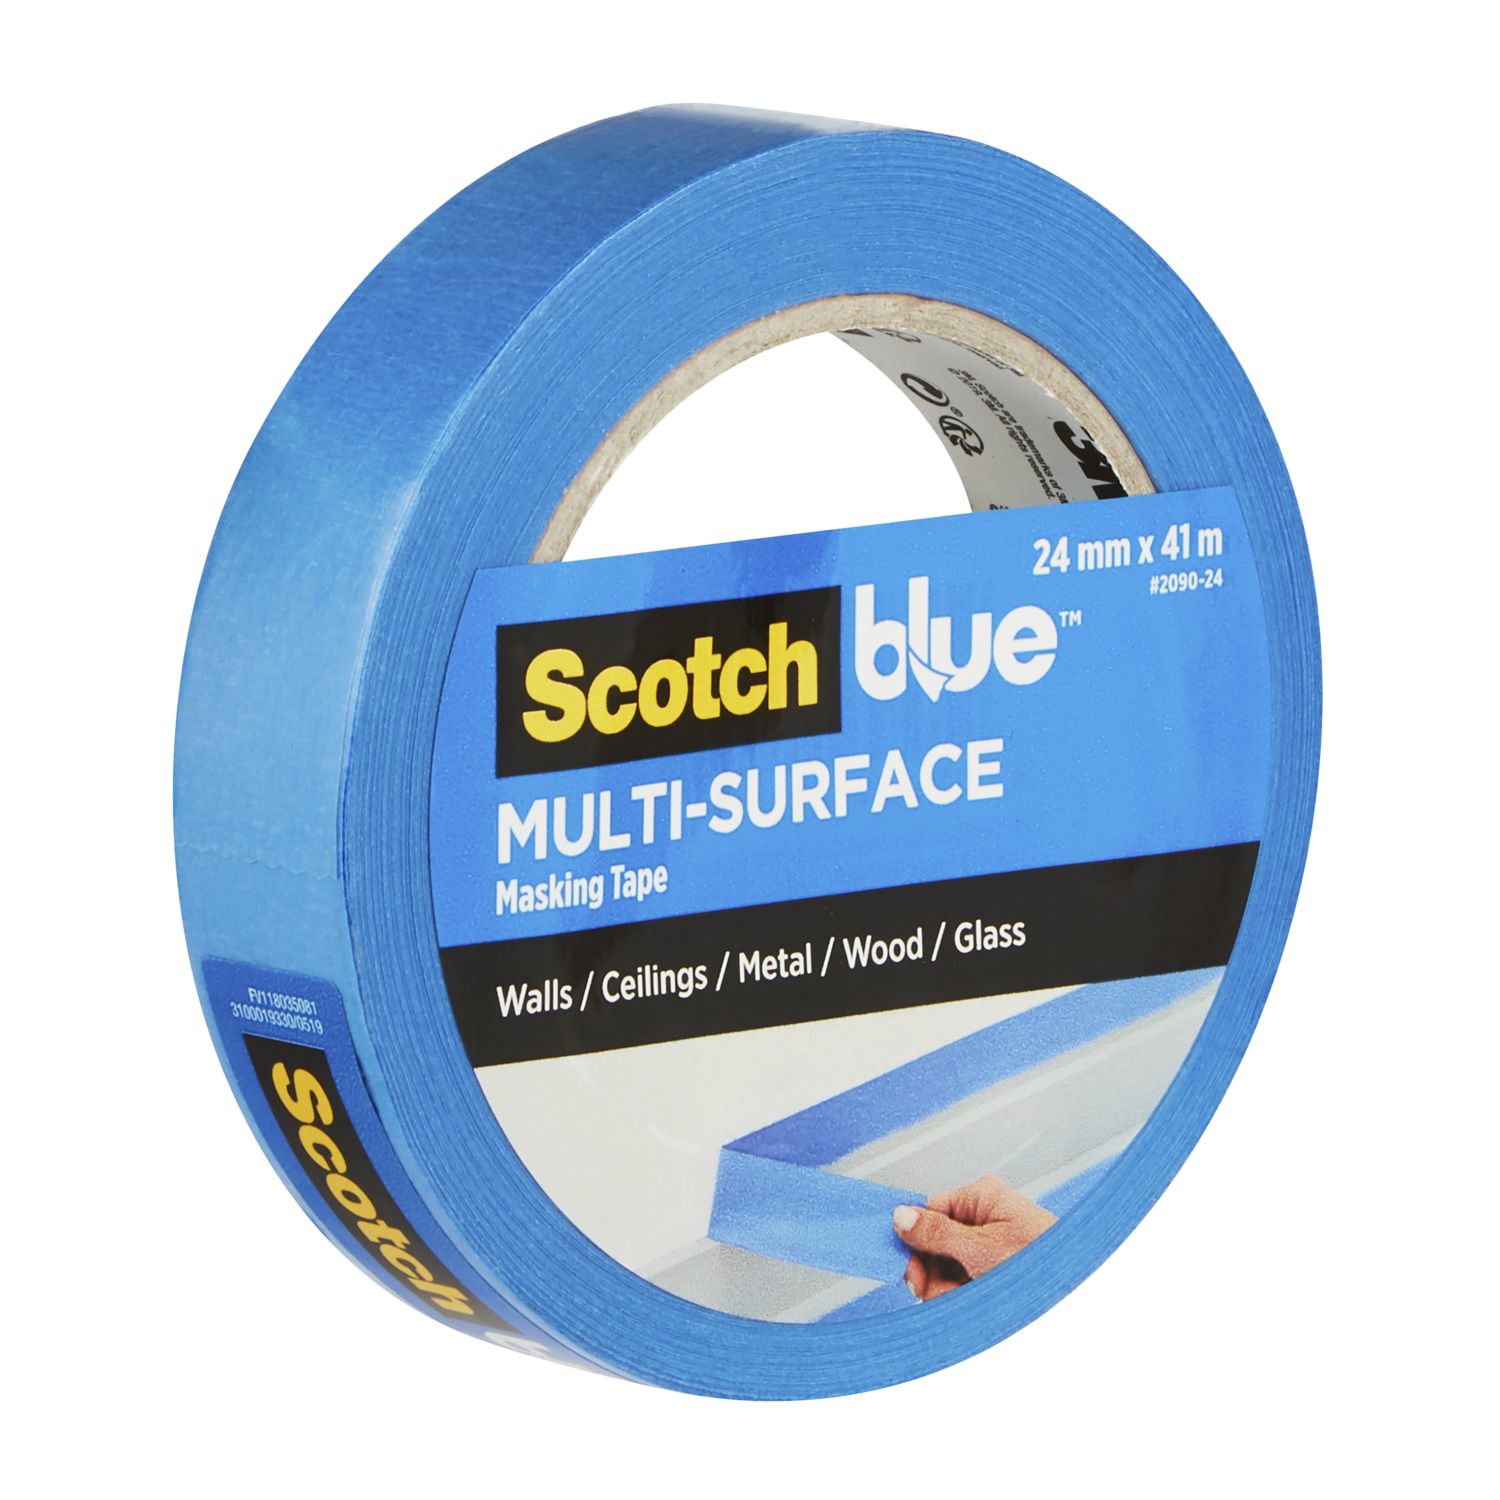 Painters Tape, Blue Masking Tape Roll, 3 Inch x 60 Yards, 768 Pack